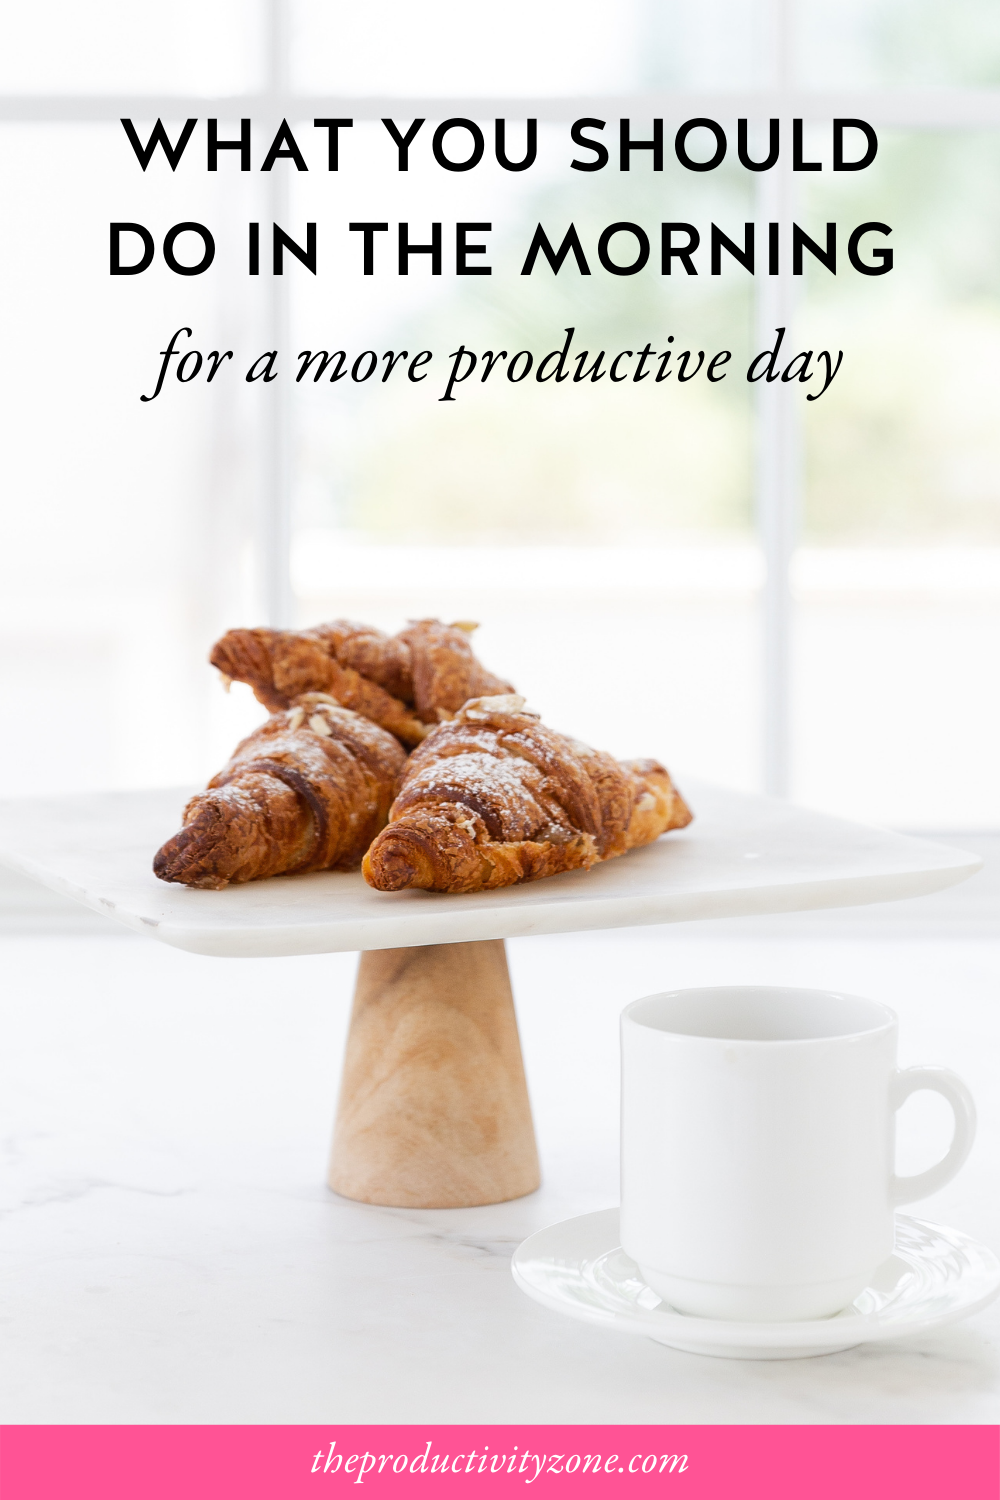 Chocolate croissants on a platter with a wooden pedestal beside a white coffee cup and saucer on a marble counter in front of a brightly lit window